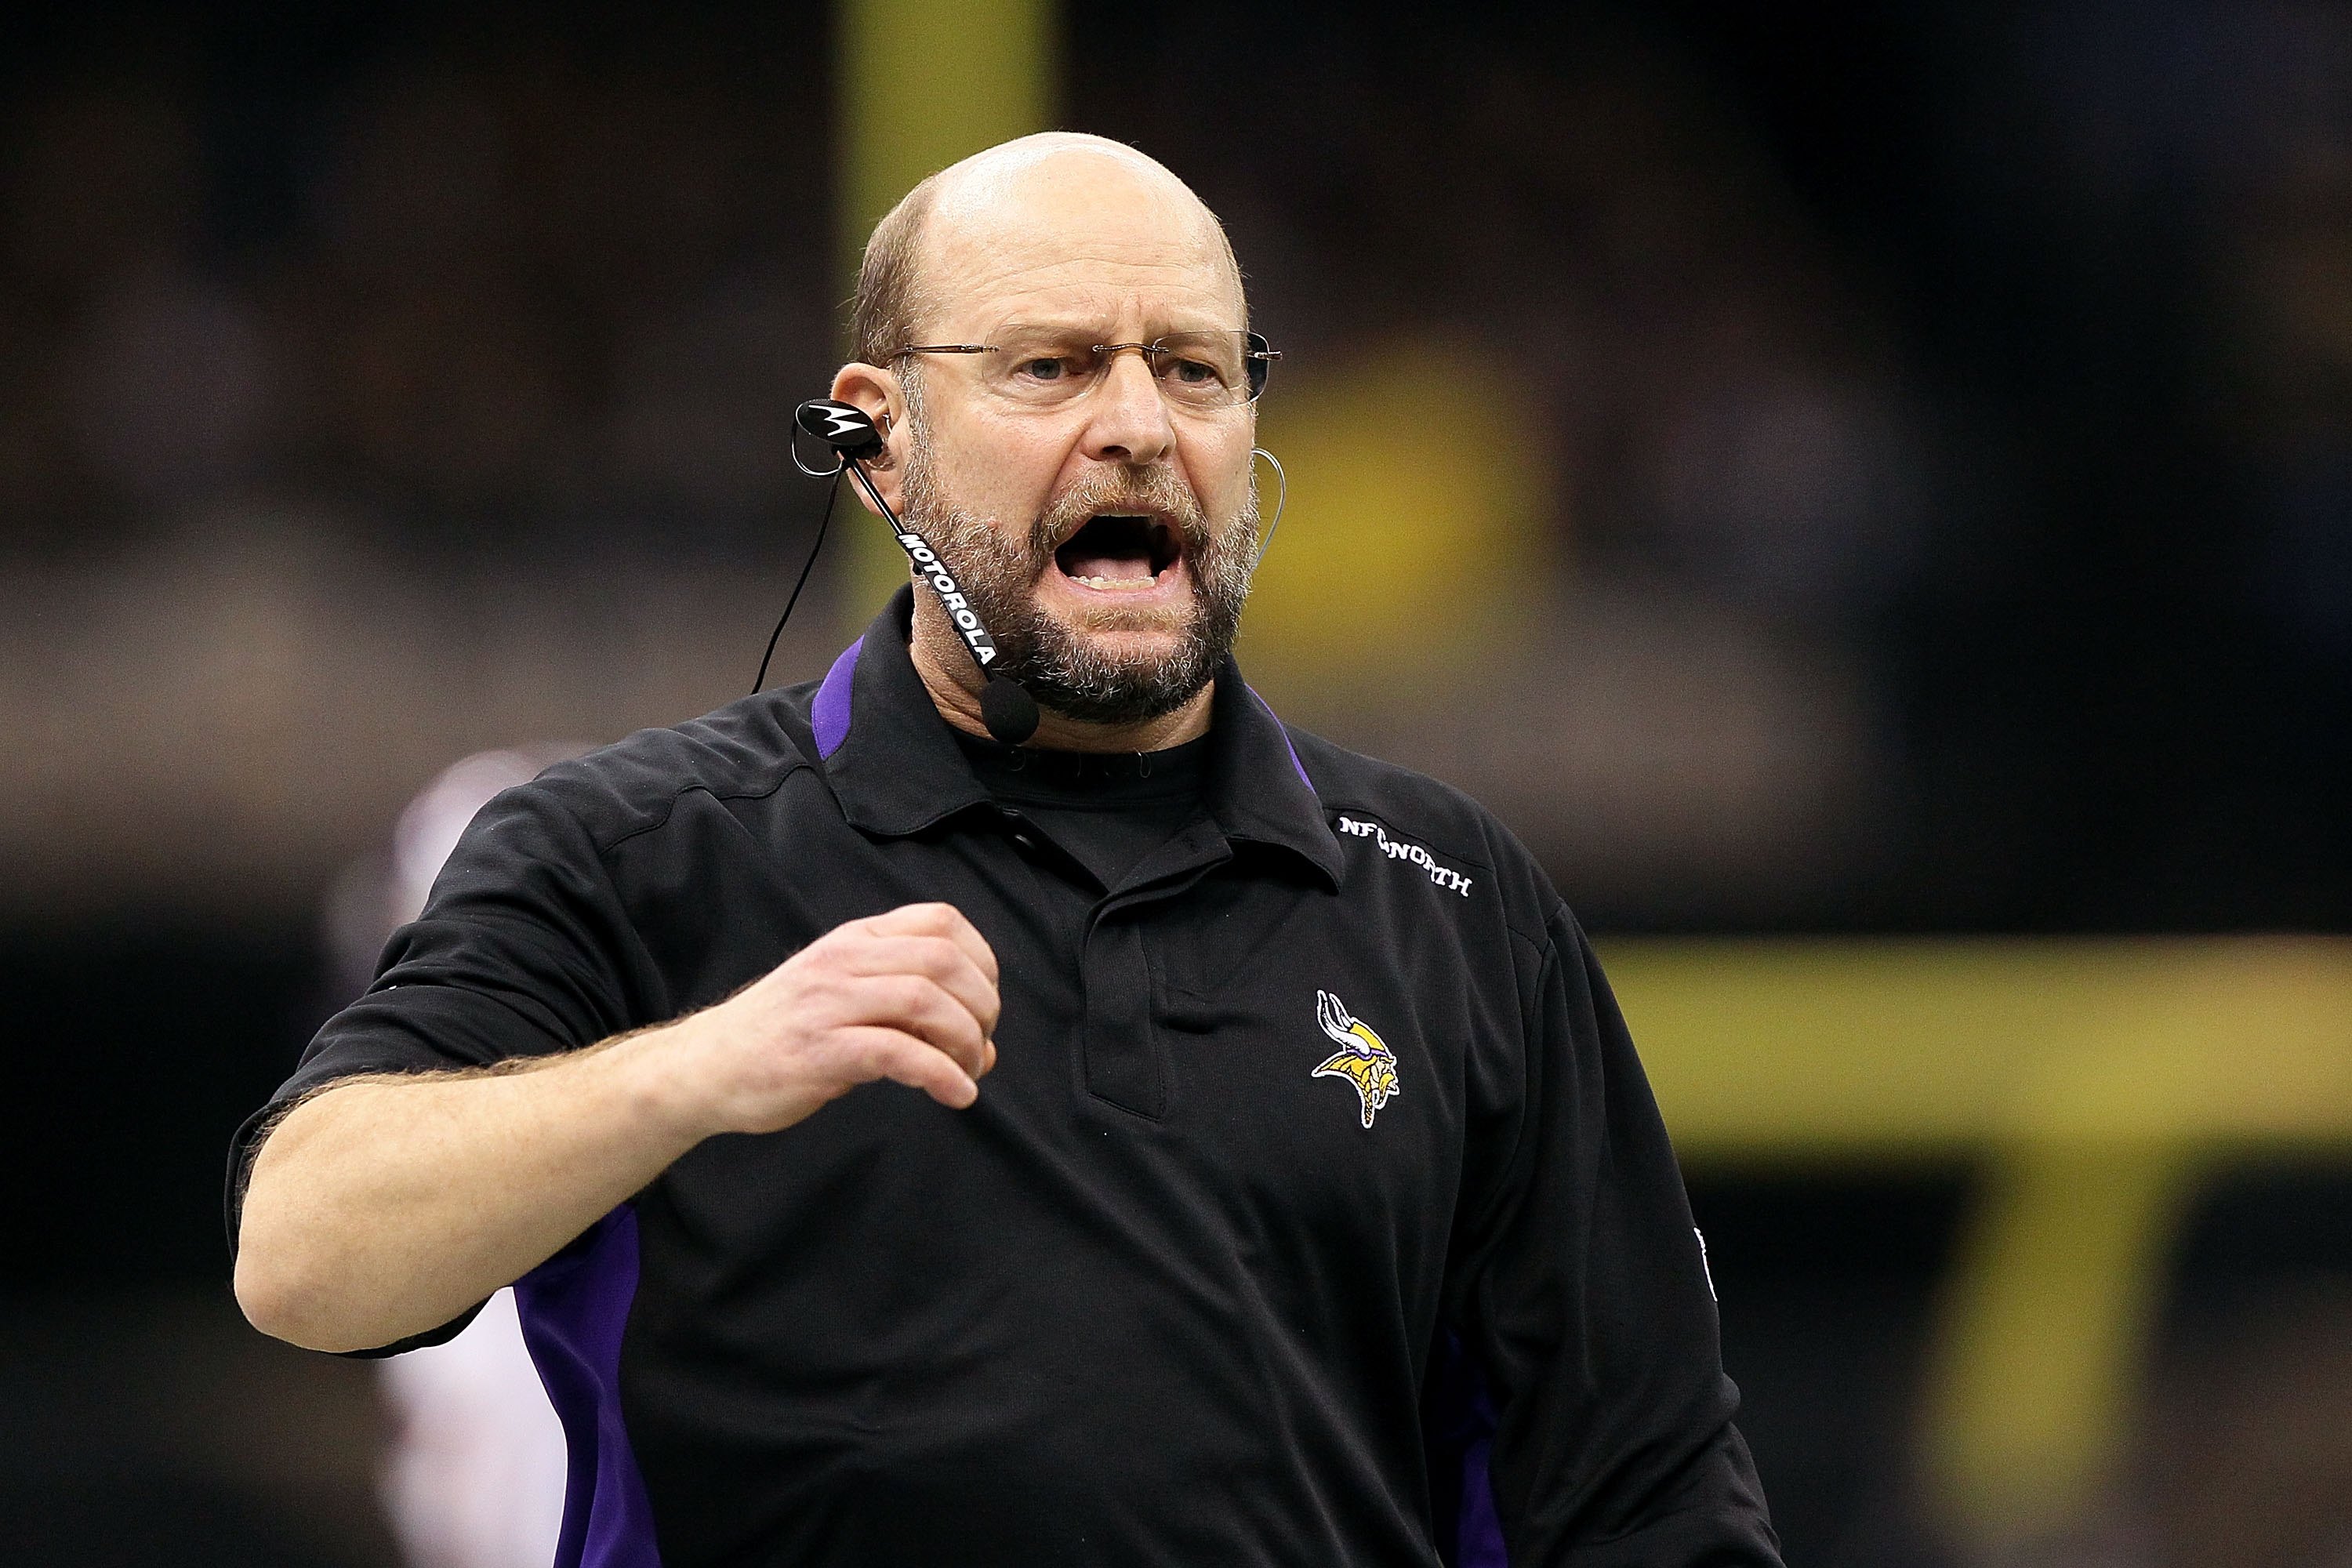 NEW ORLEANS - JANUARY 24:  Head coach Brad Childress of the Minnesota Vikings reacts against the New Orleans Saints during the NFC Championship Game at the Louisiana Superdome on January 24, 2010 in New Orleans, Louisiana.  (Photo by Jed Jacobsohn/Getty I